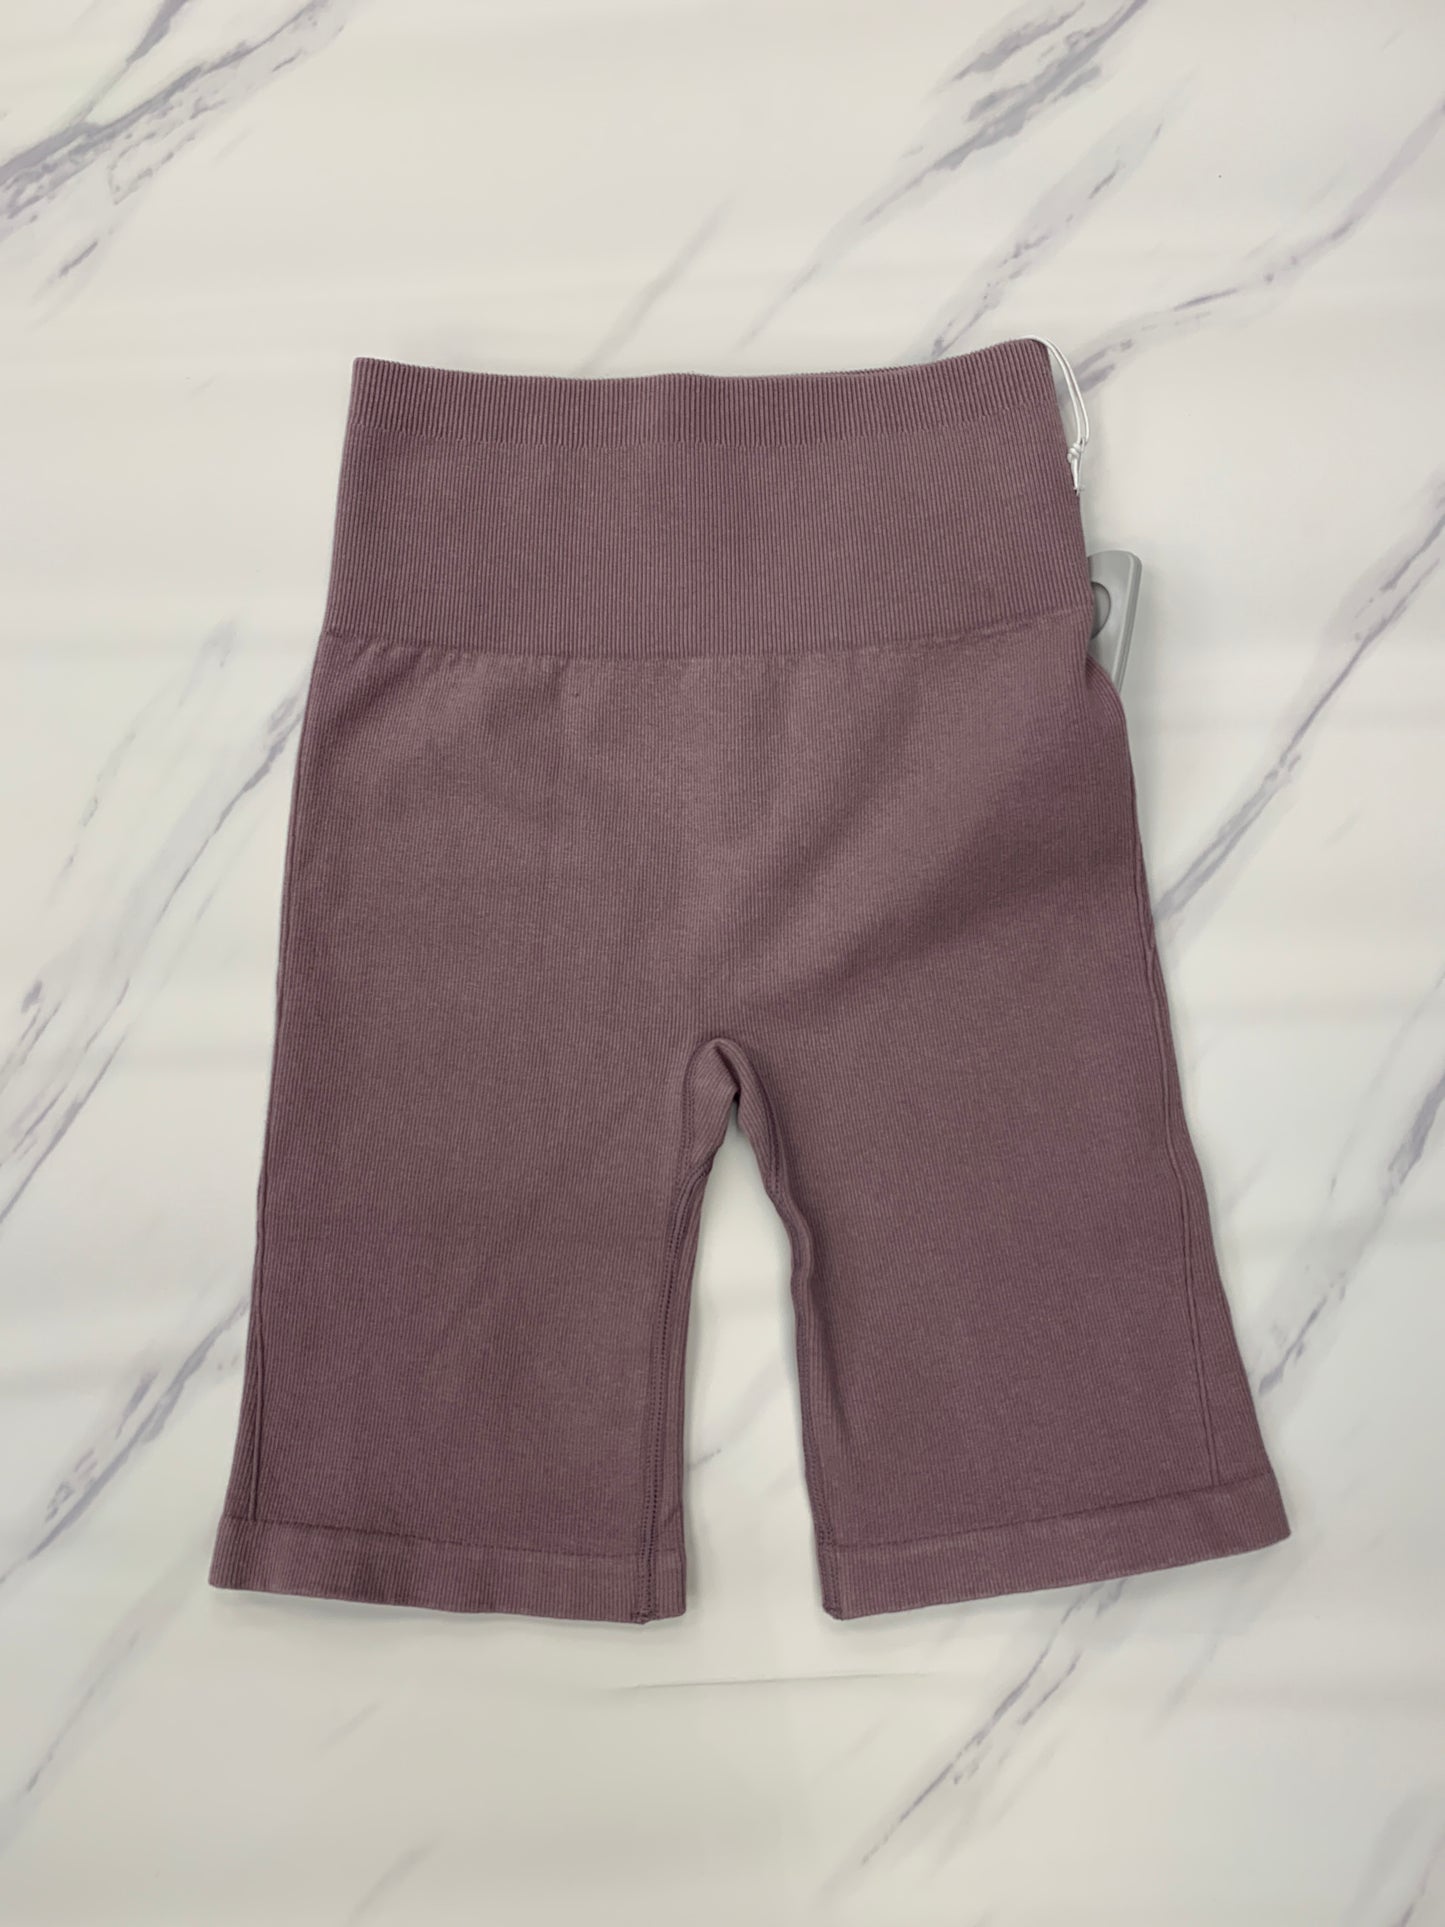 Athletic Shorts By Everlane  Size: S